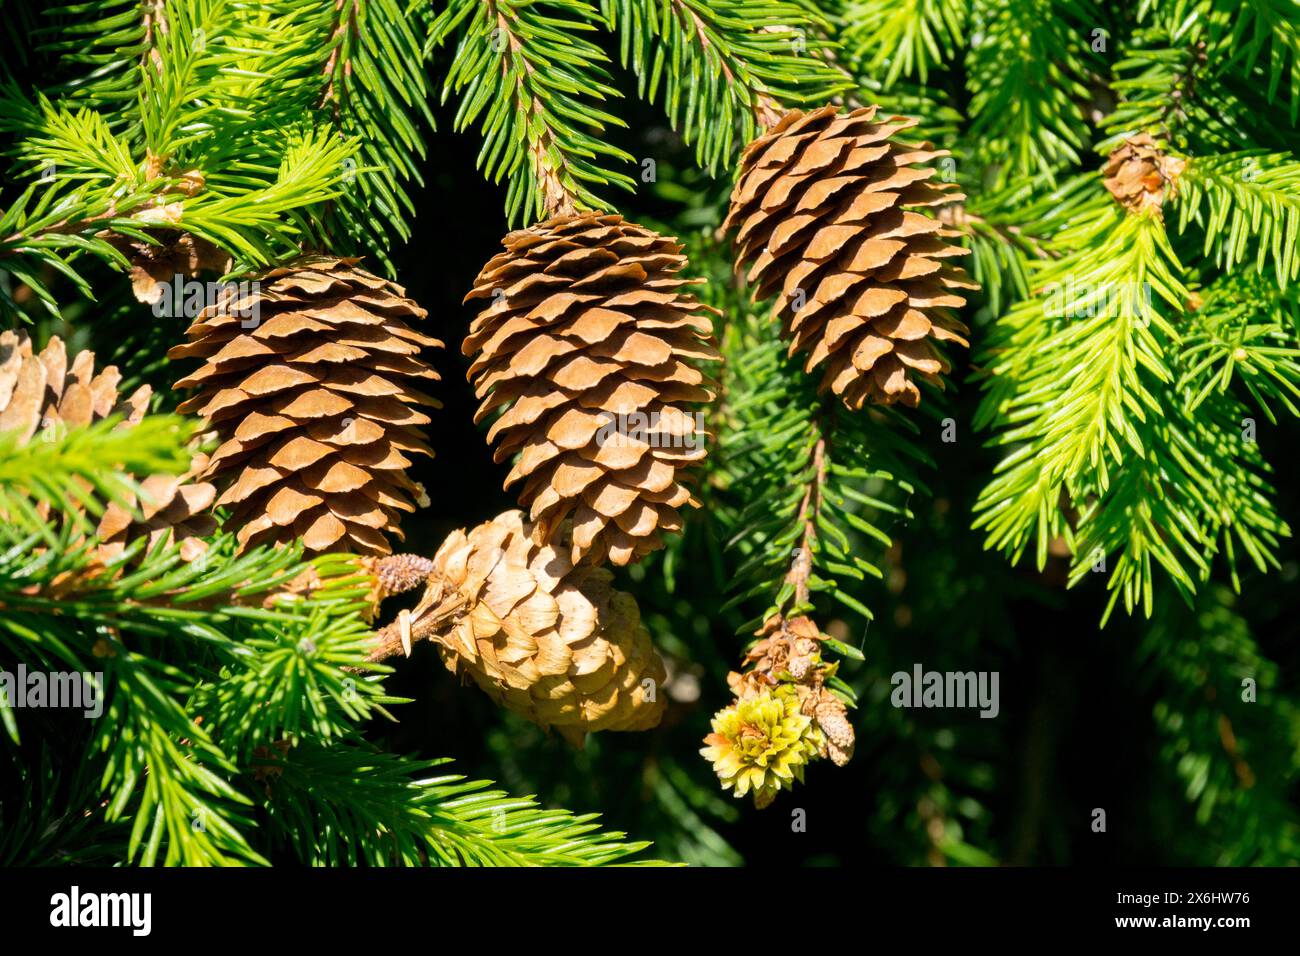 Picea abies 'Pusch' Dwarf, Tiny, Tree Low, Norway Spruce Cones Female Stock Photo